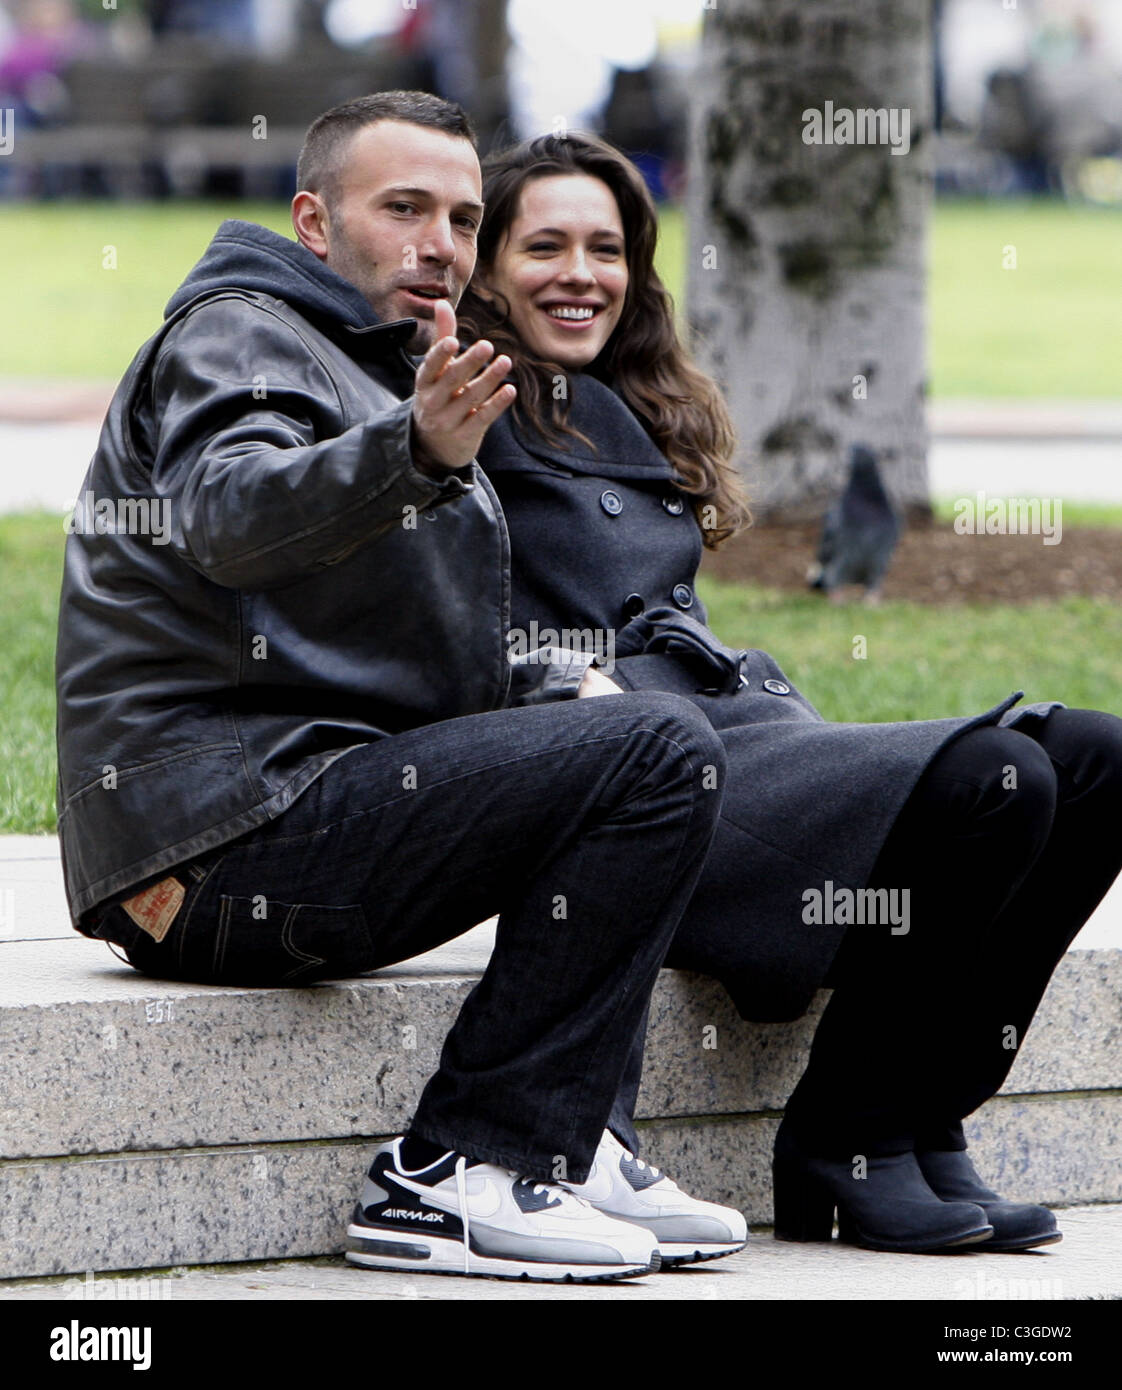 Ben Affleck and Rebecca Hall on the set of 'The Town' filming in Copley  Square Boston, Massachusetts - 01.10.09 Stock Photo - Alamy